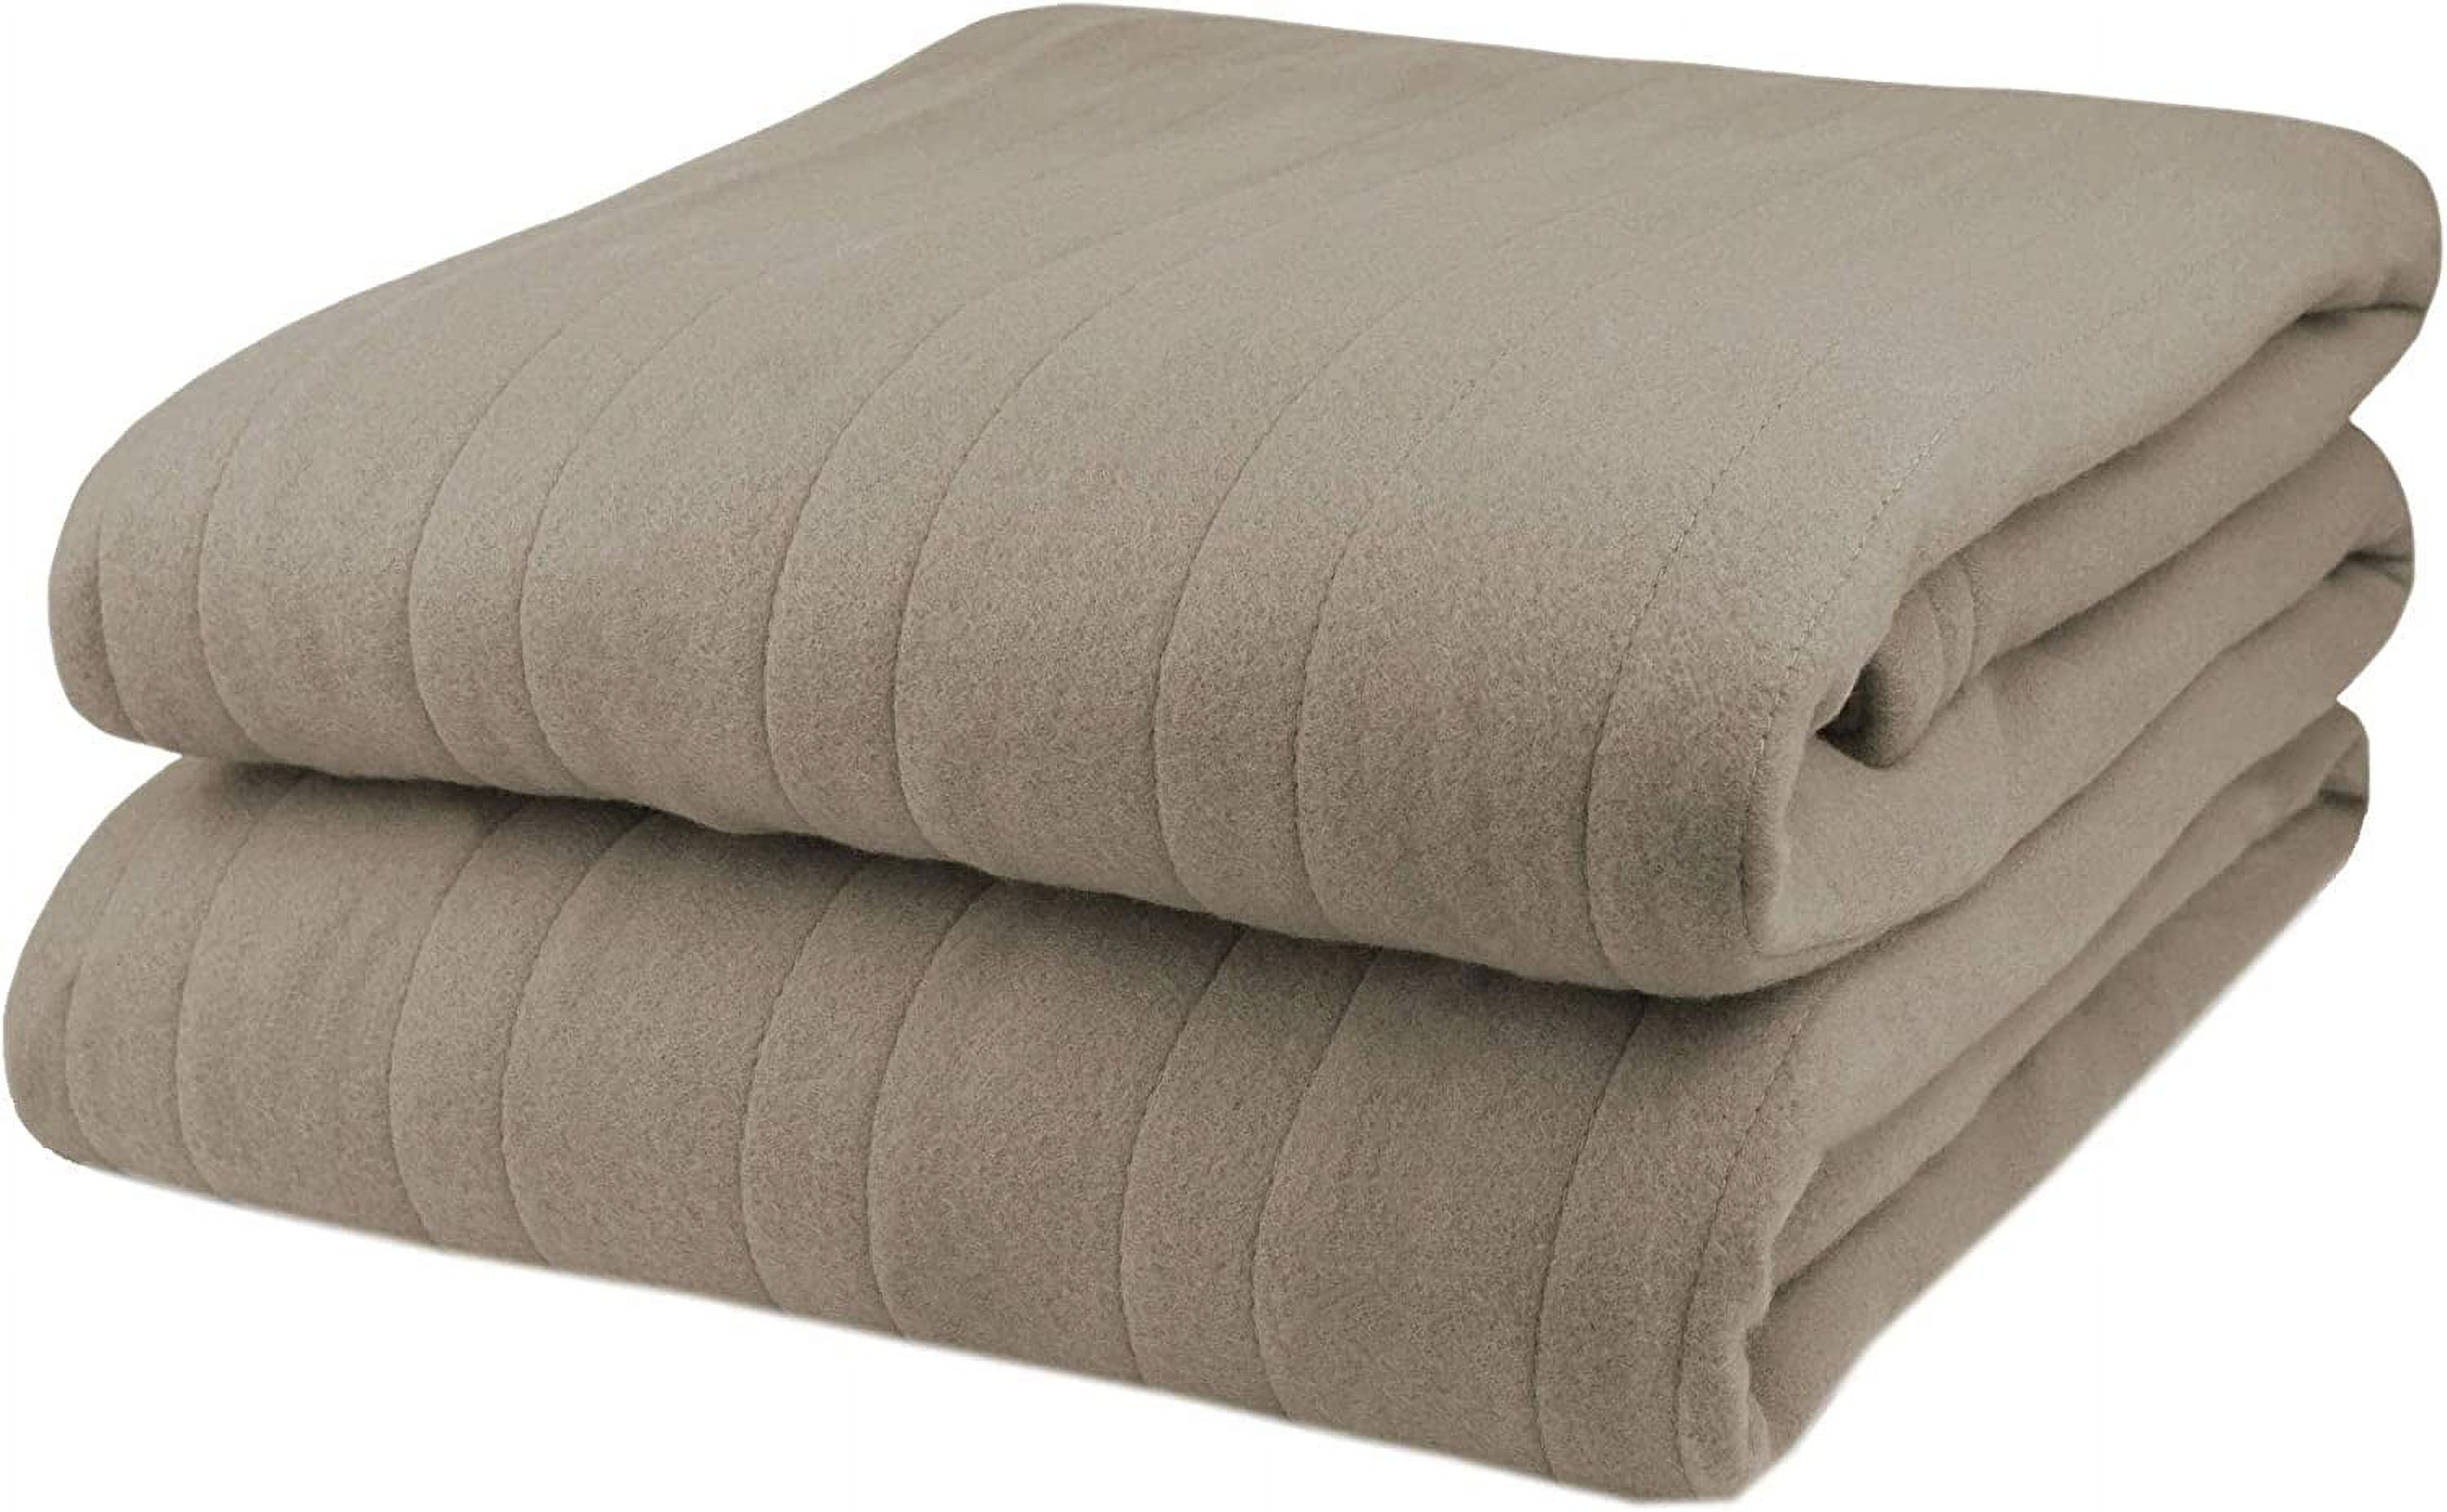 Biddeford Blankets Comfort Knit Electric Heated Blanket With Analog ...